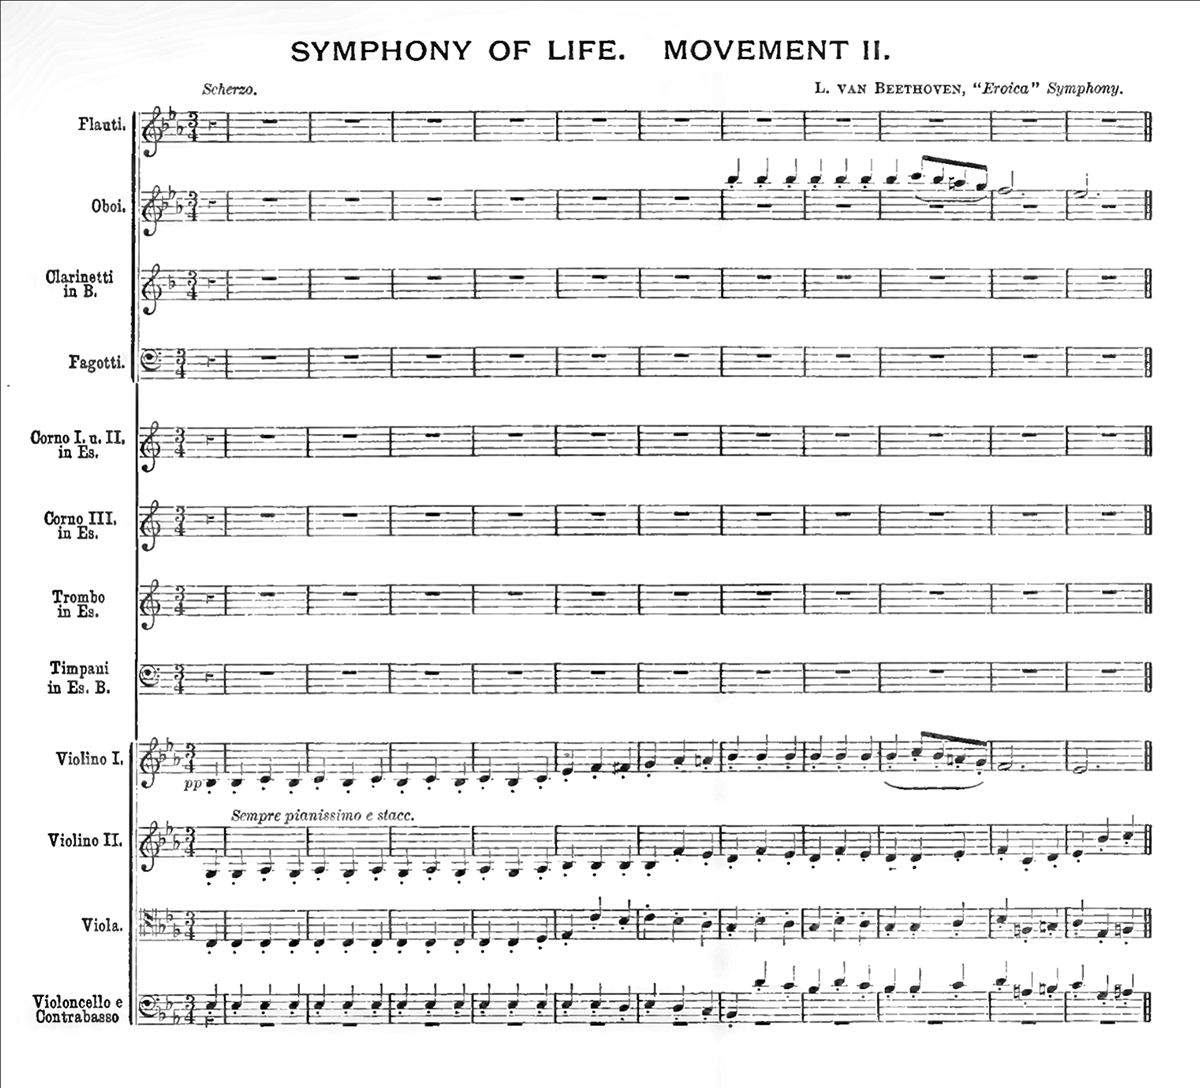 {Symphony of Life, Movement 2. The first page of the score of the second movement, Scherzo, of Beethoven}